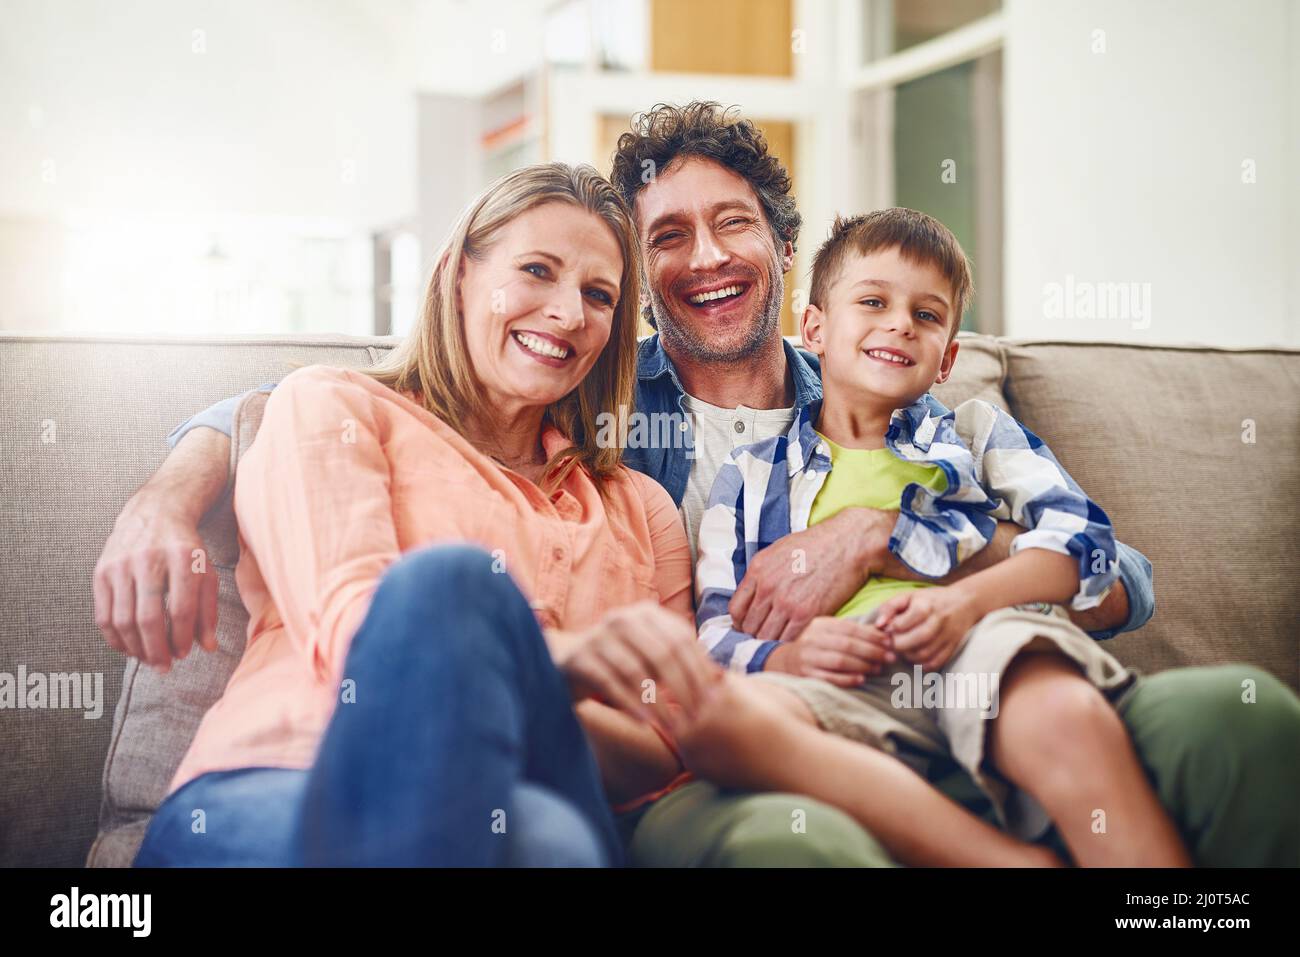 The love of a family. Portrait of a happy family bonding together at home. Stock Photo